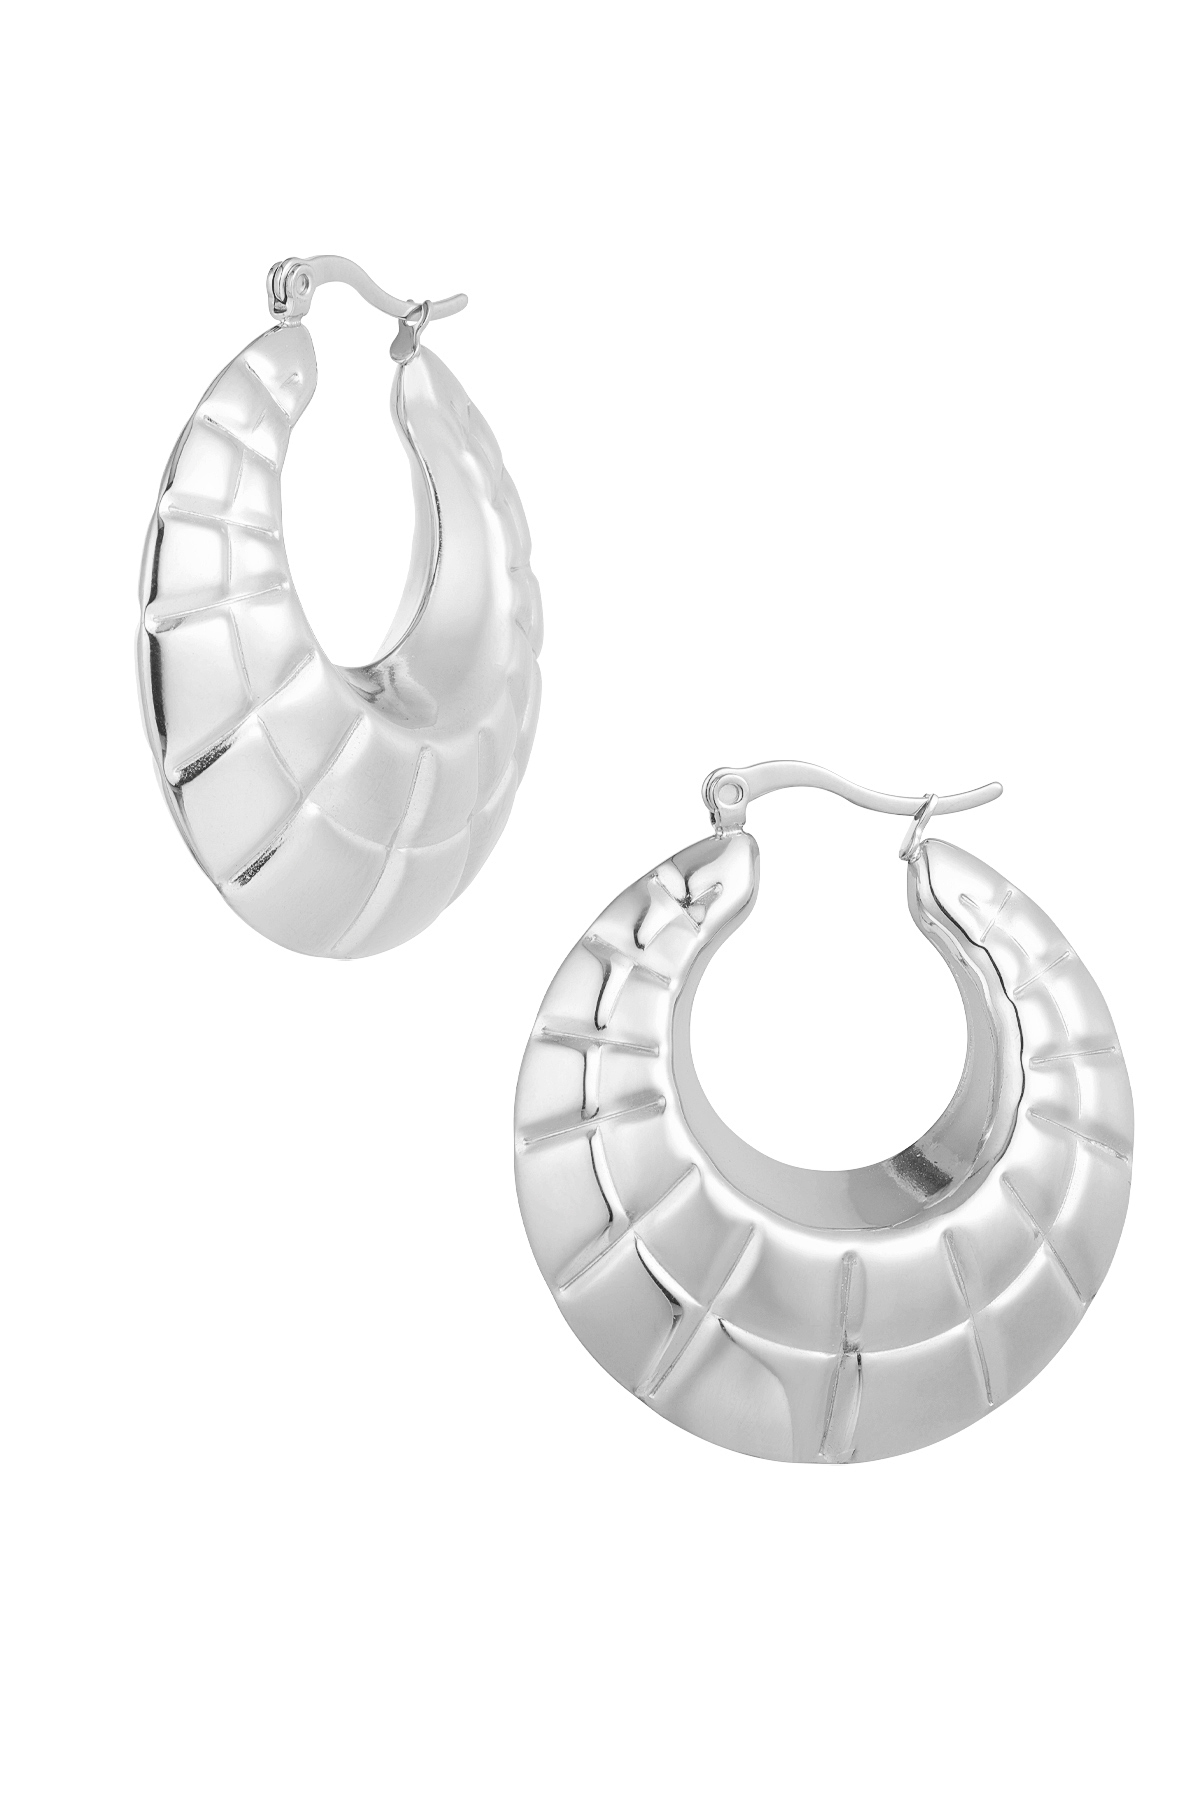 Earrings statement hoops cut out - silver h5 